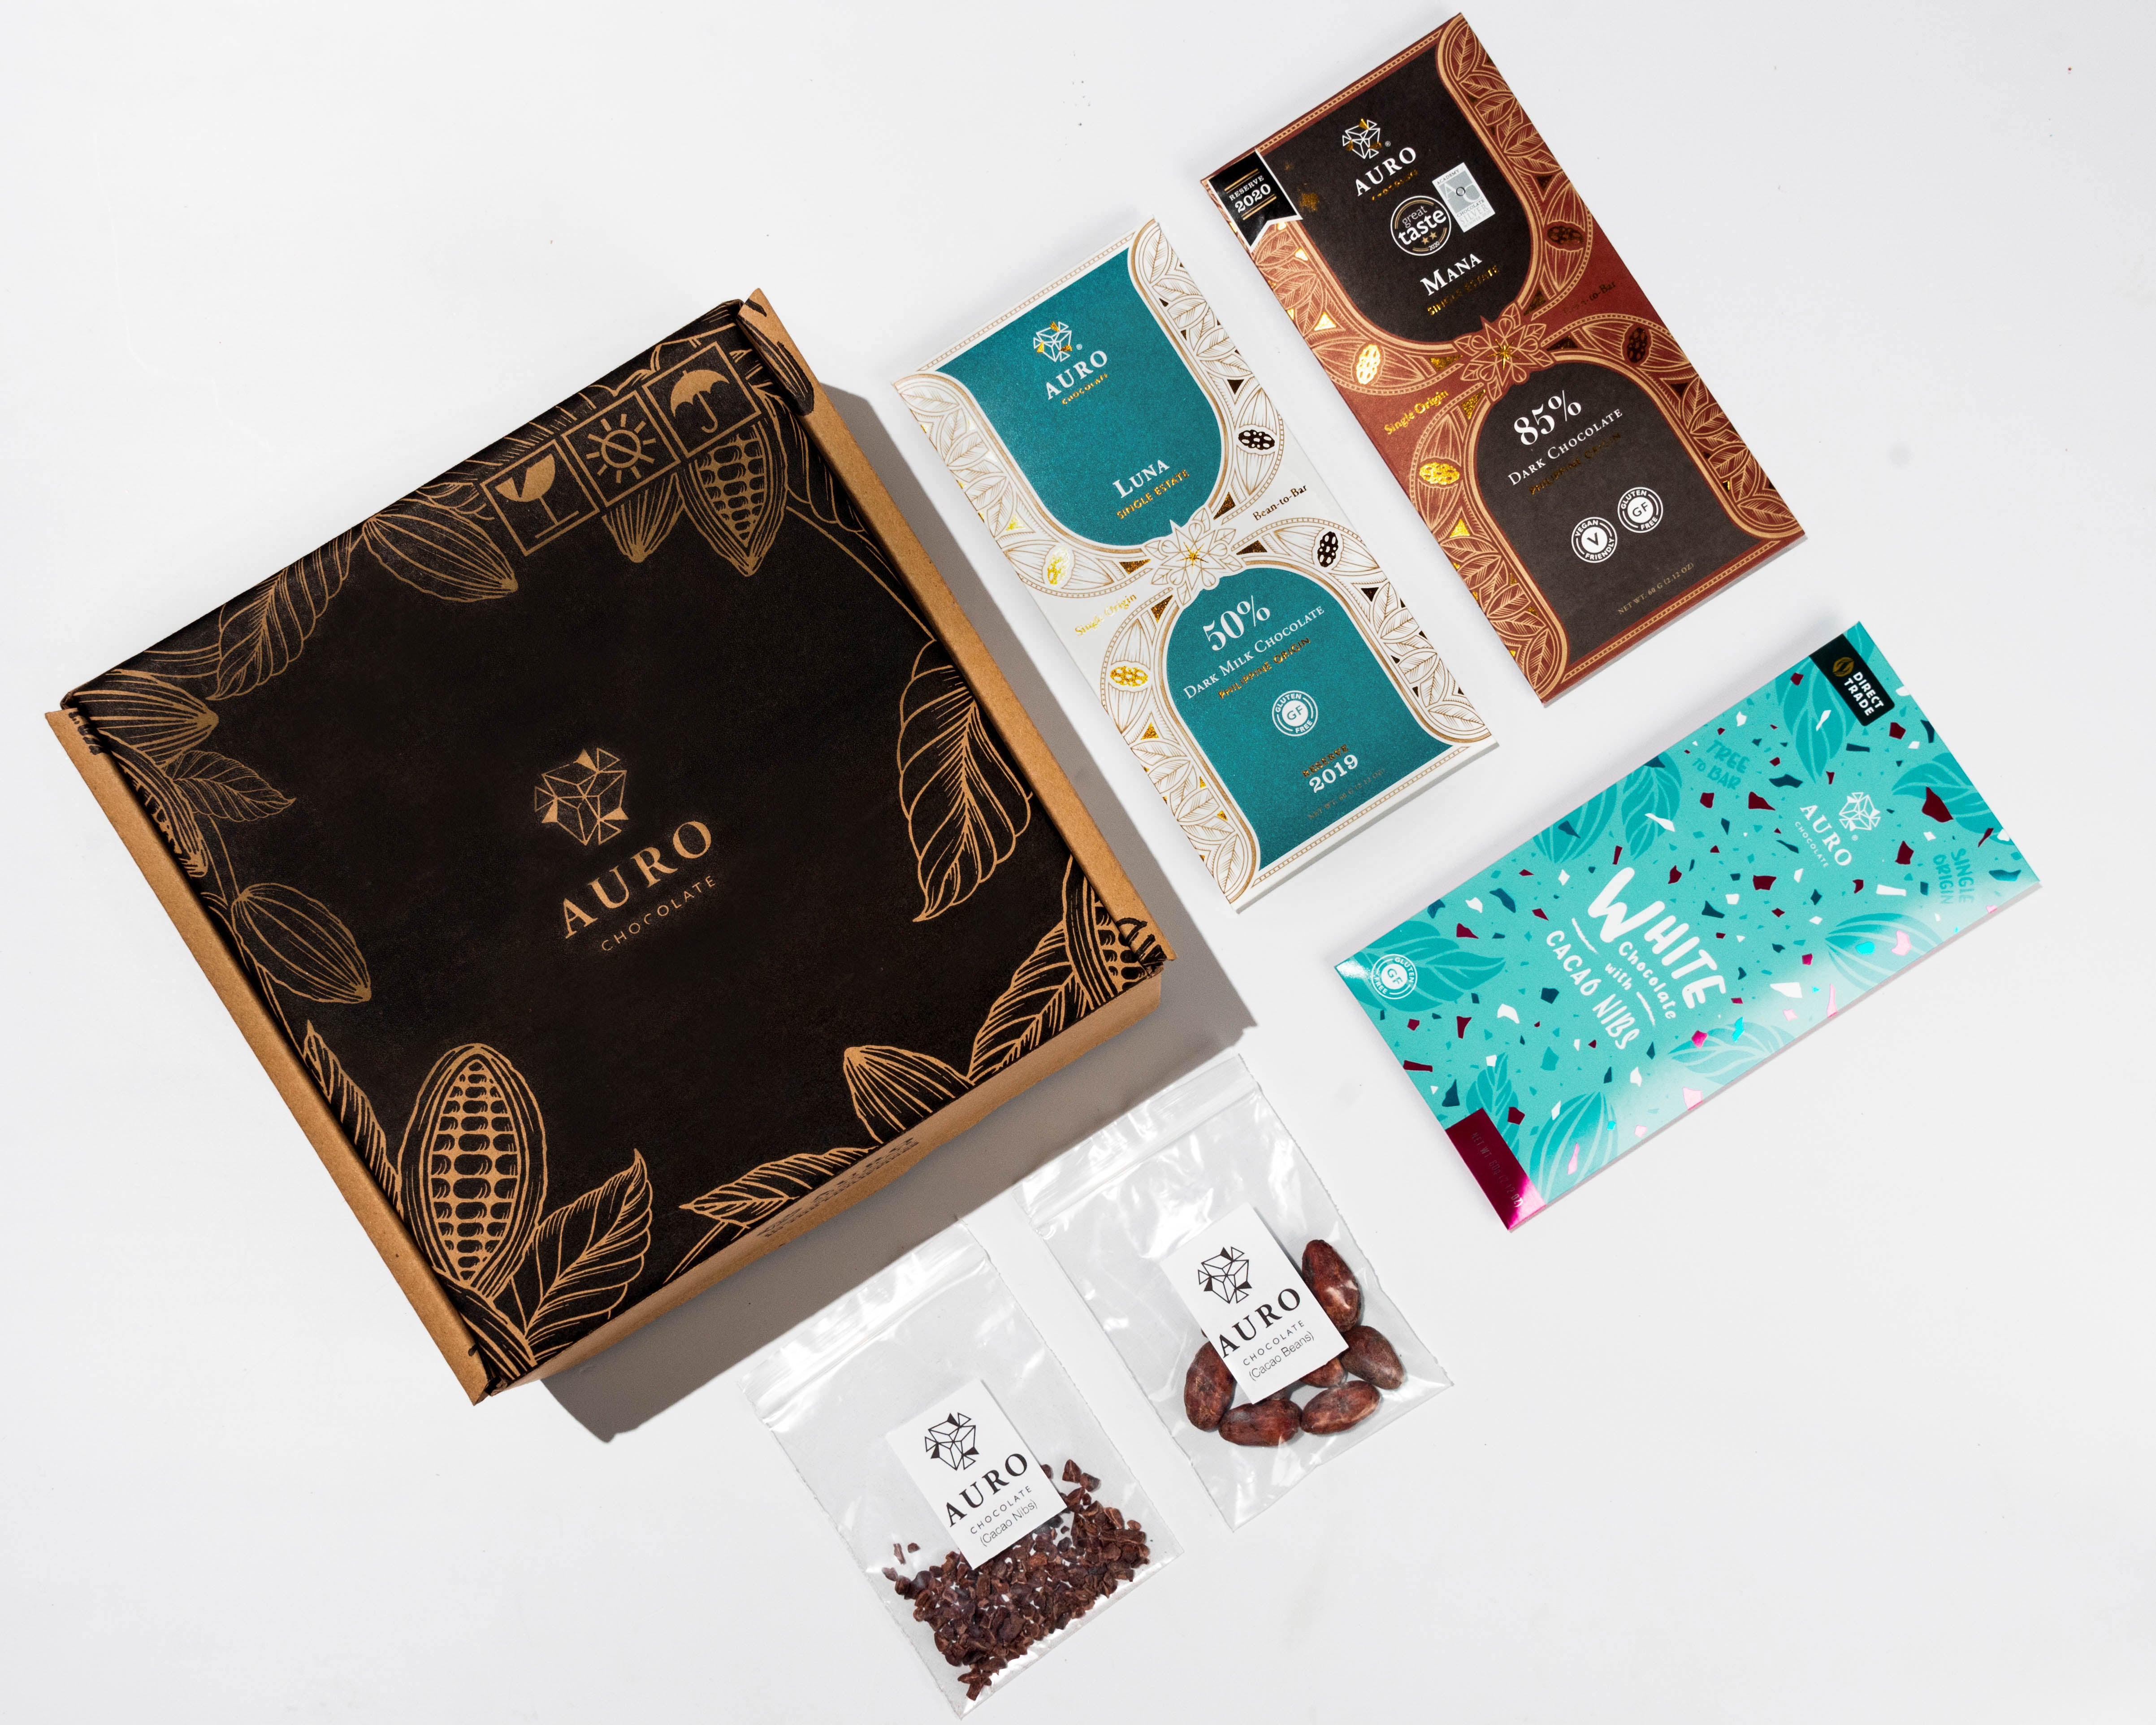 Auro Private Home Series: Introduction to Chocolate Tasting package